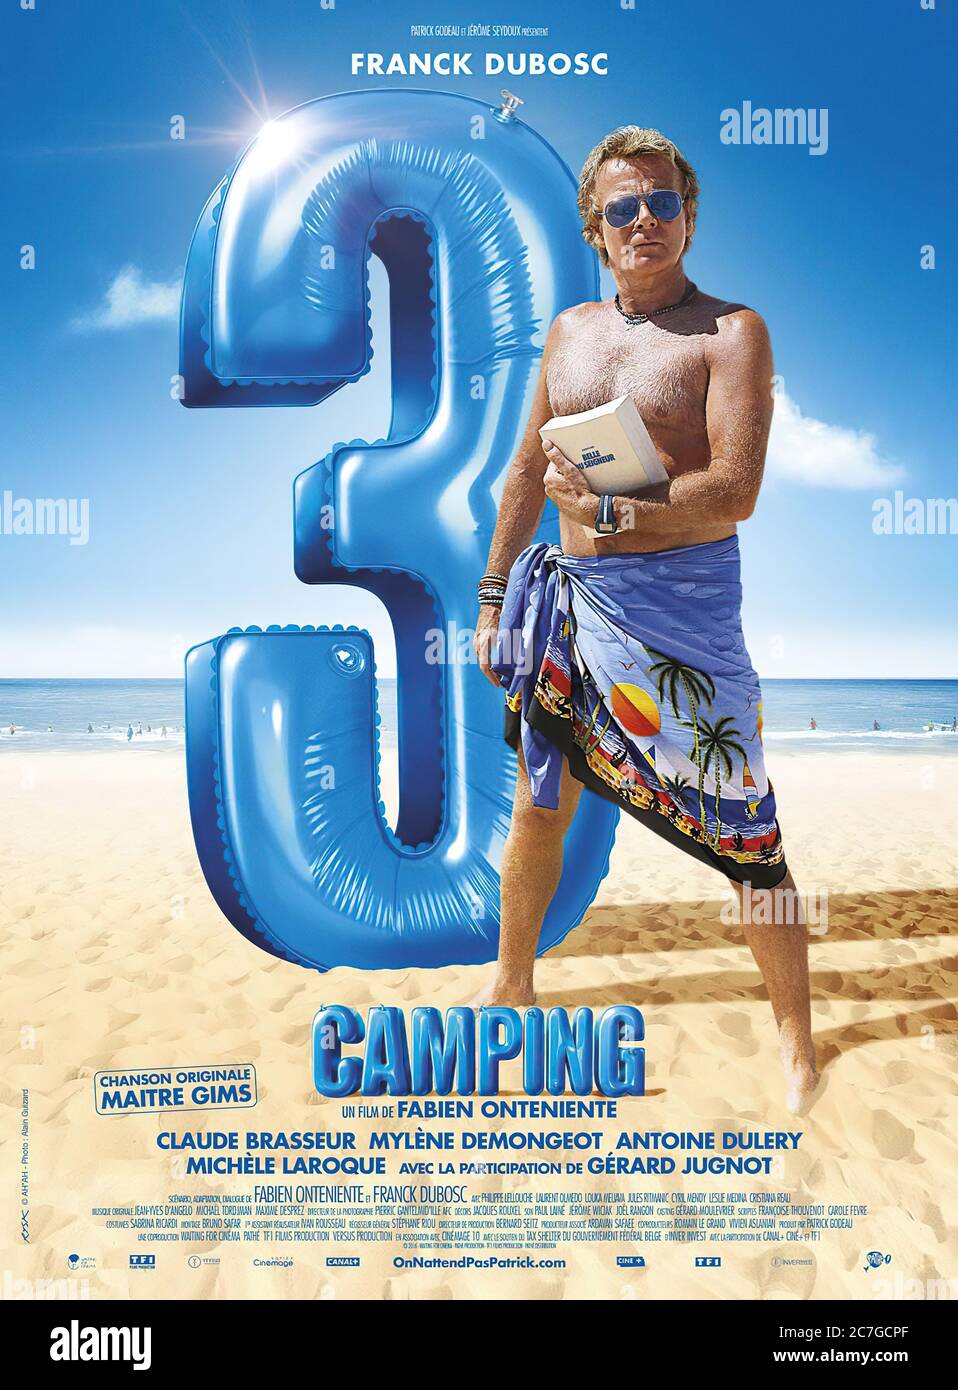 Camping 3 - Movie Poster Stock Photo